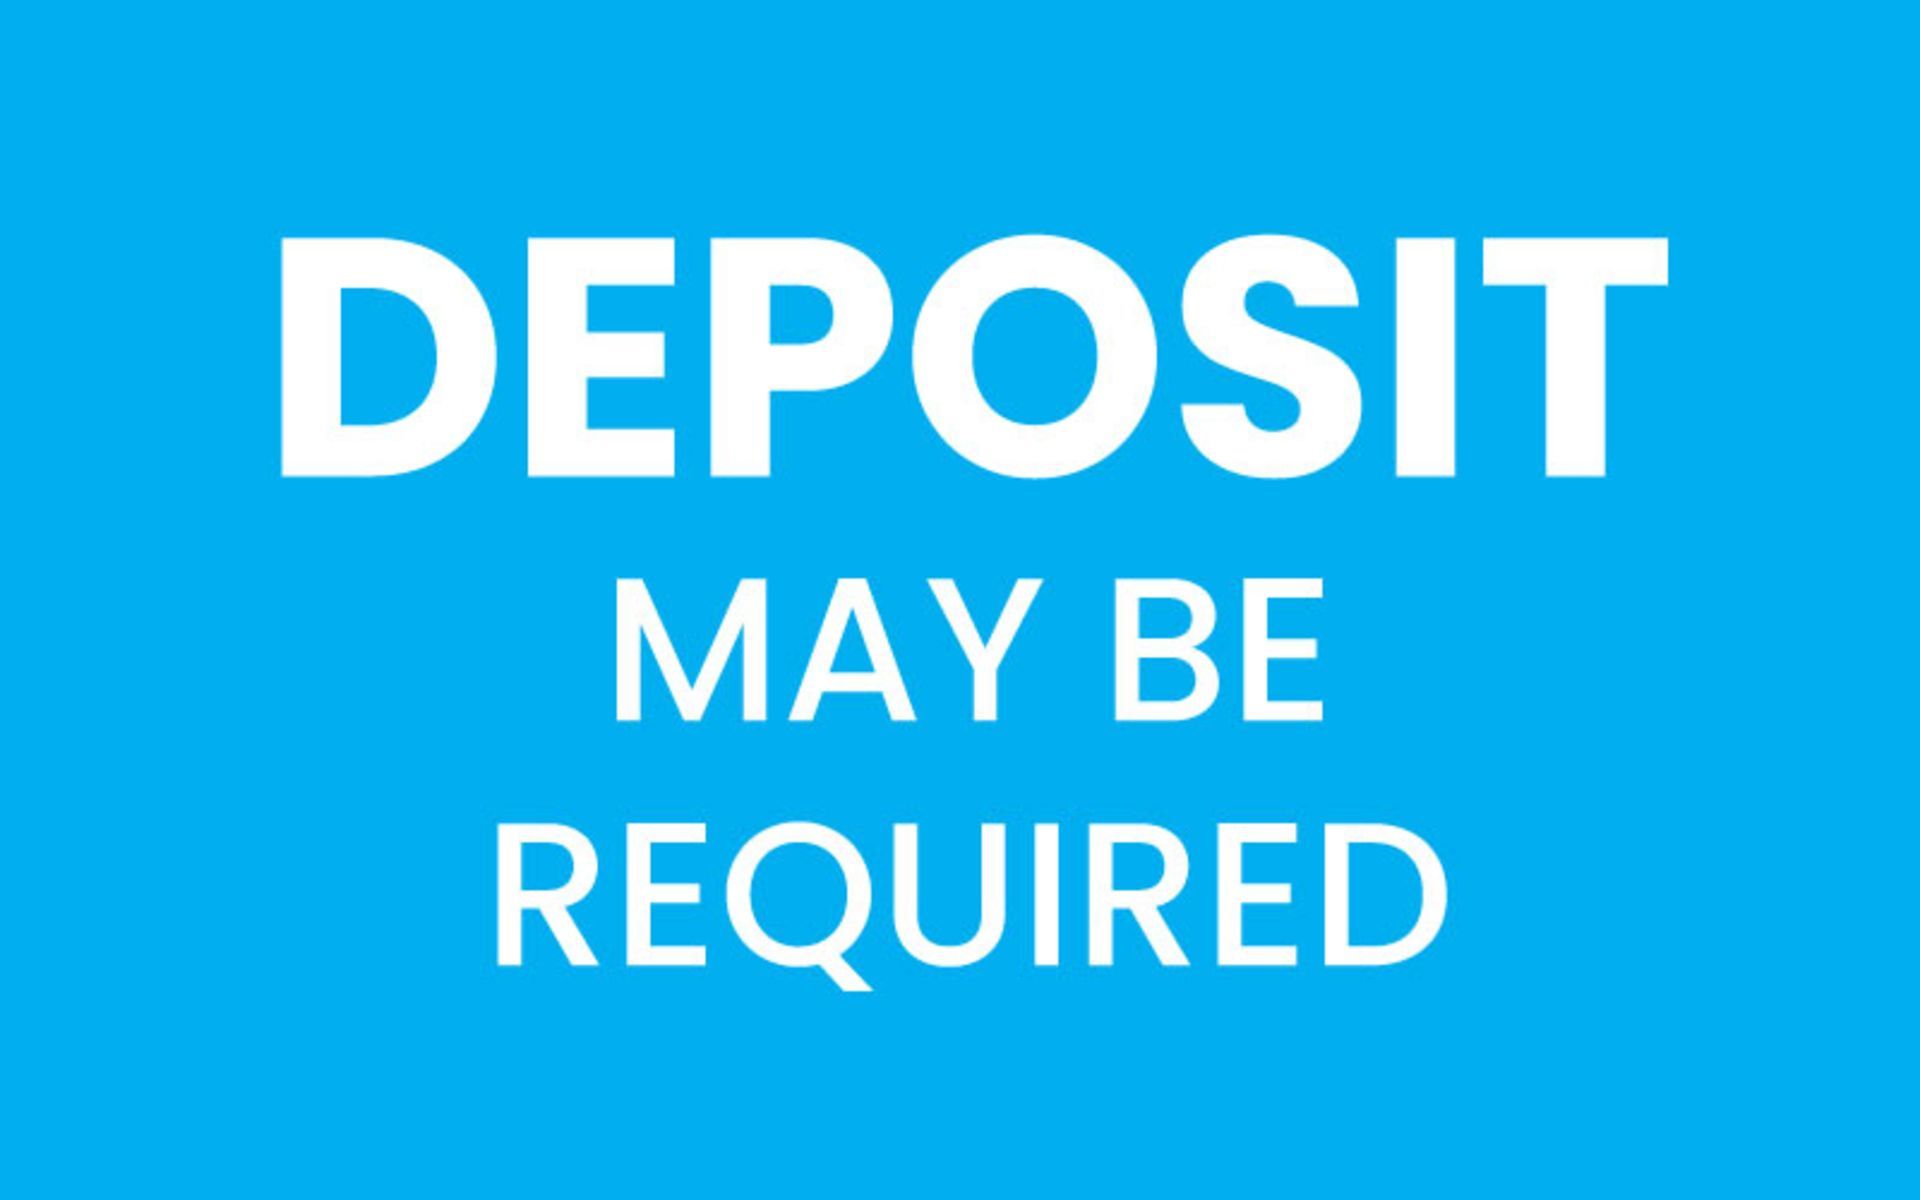 Buyers residing outside the U.S.A. or Canada, will be required to send a $5,000.00 deposit